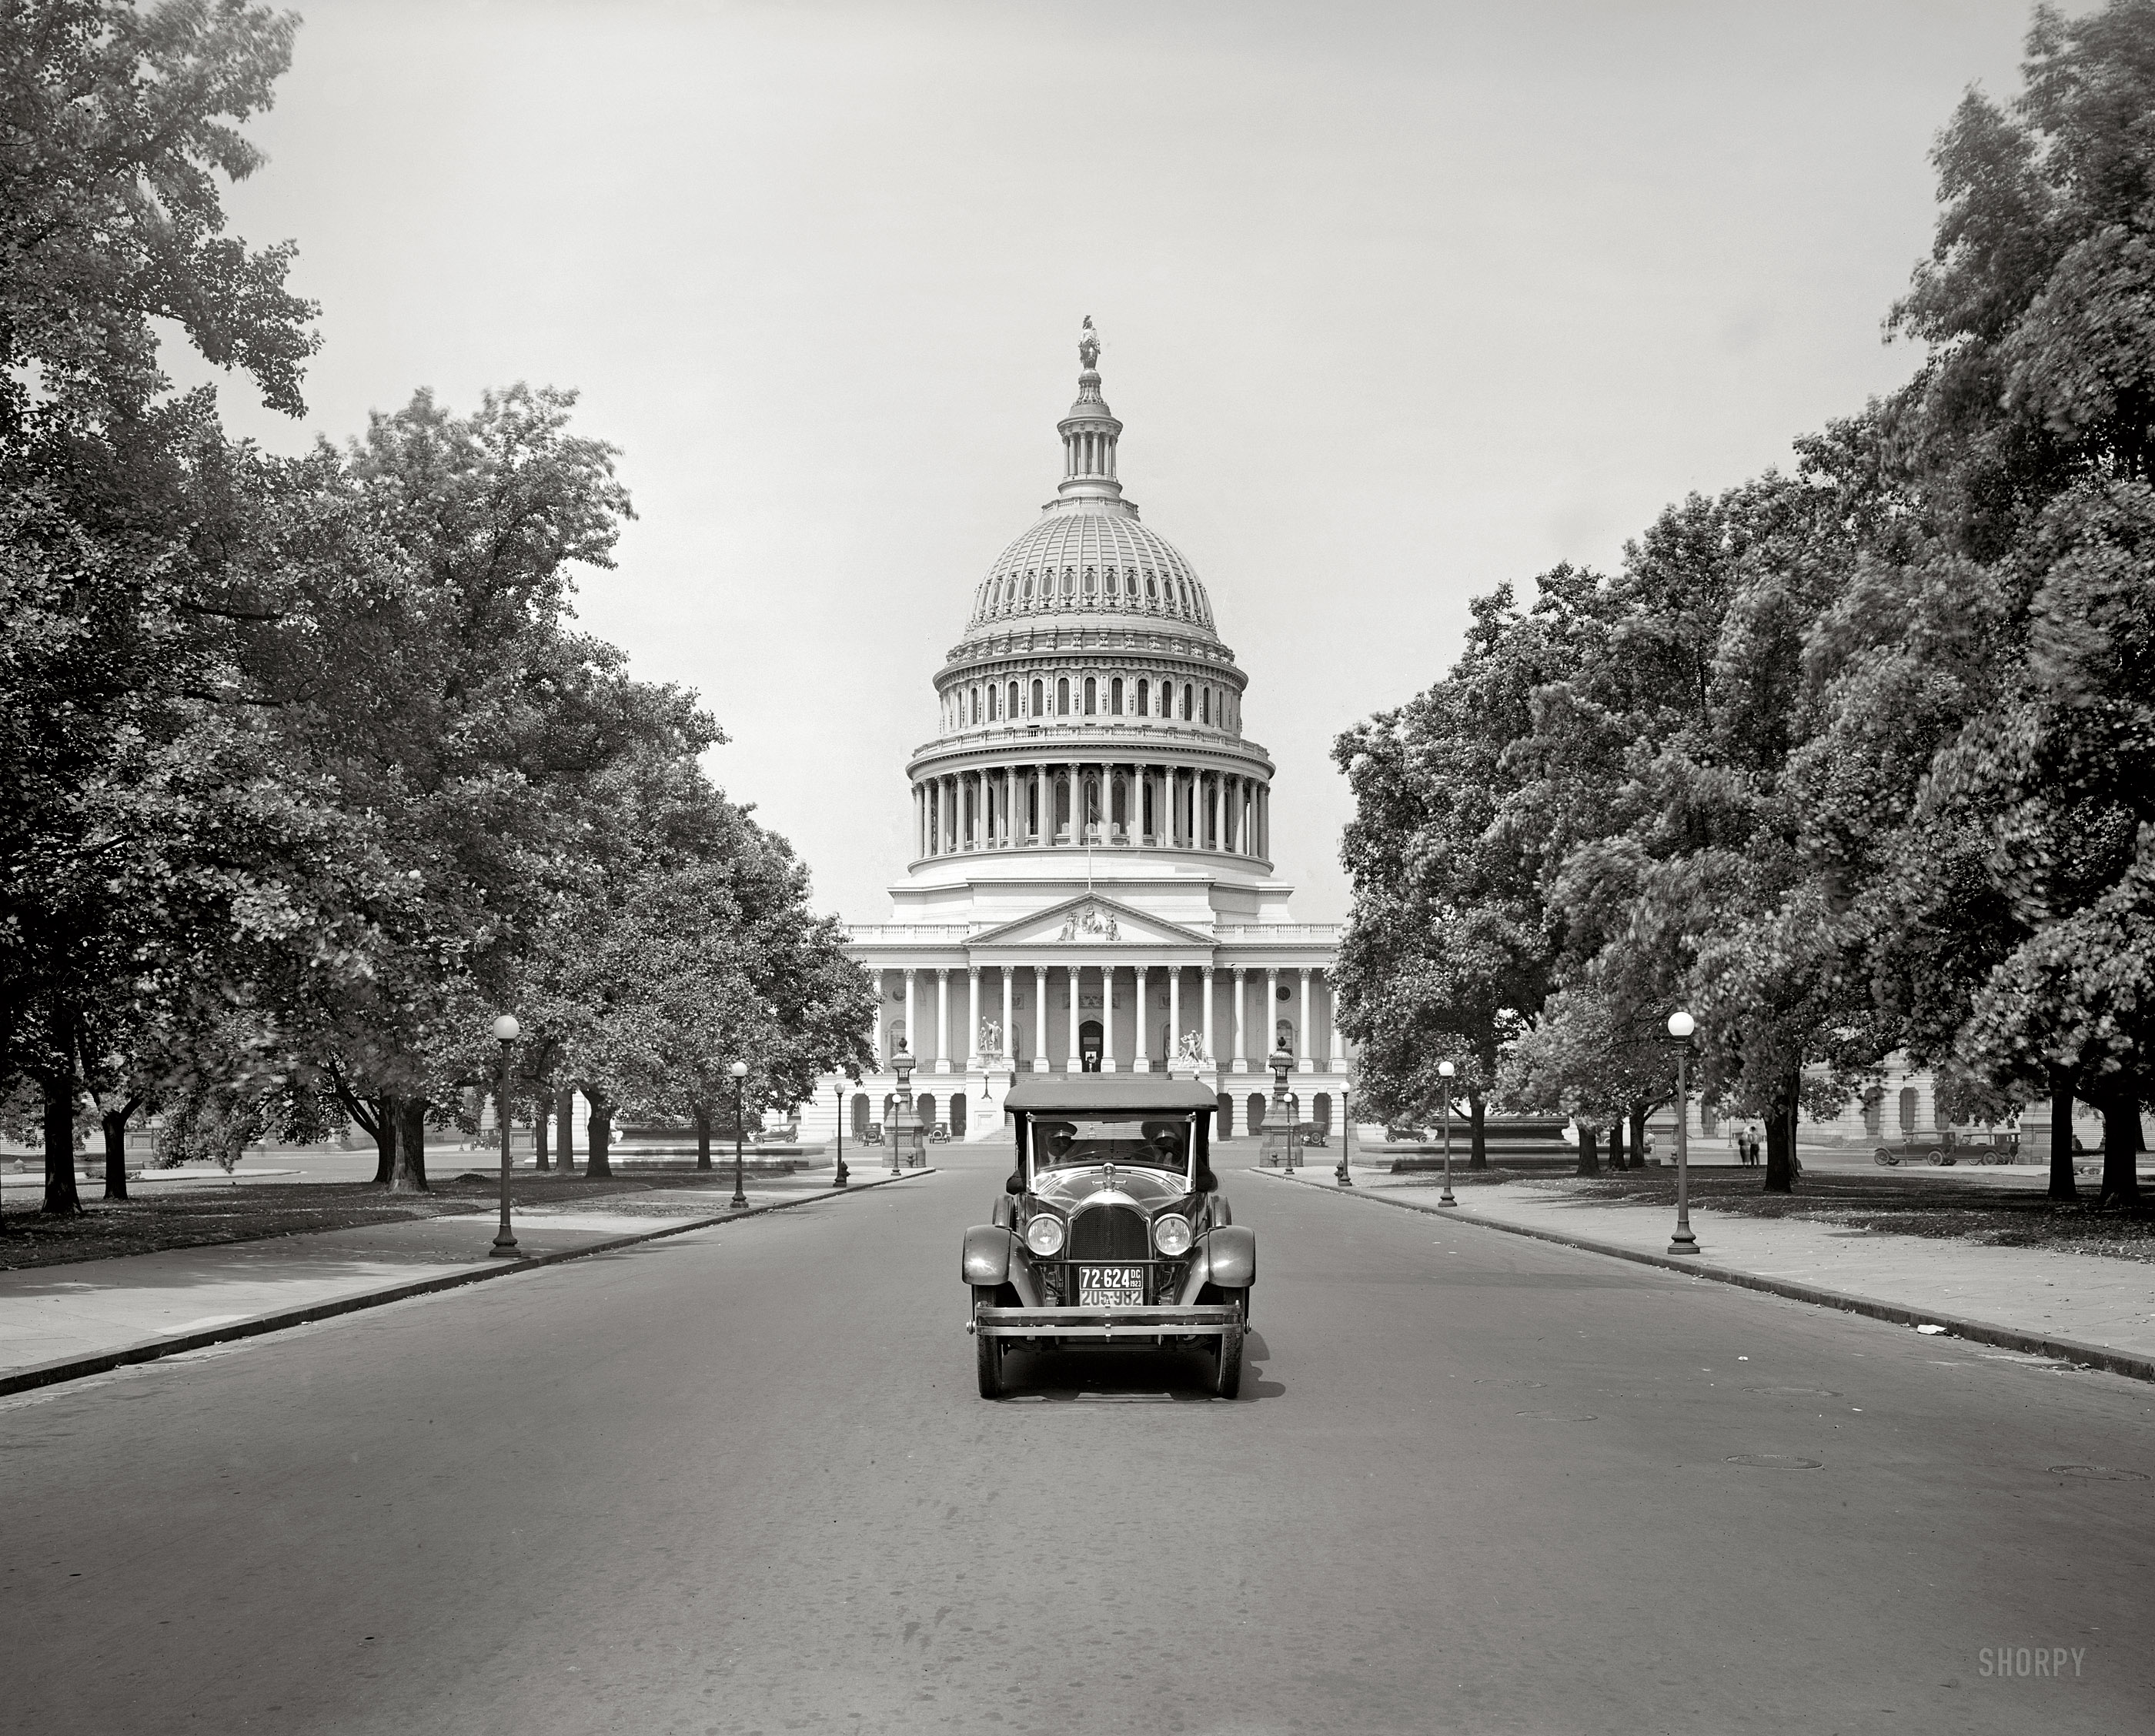 Washington, D.C., 1923. "Paige Motor Co." The Paige was advertised as "the most beautiful car in America." National Photo Co. glass negative. View full size.